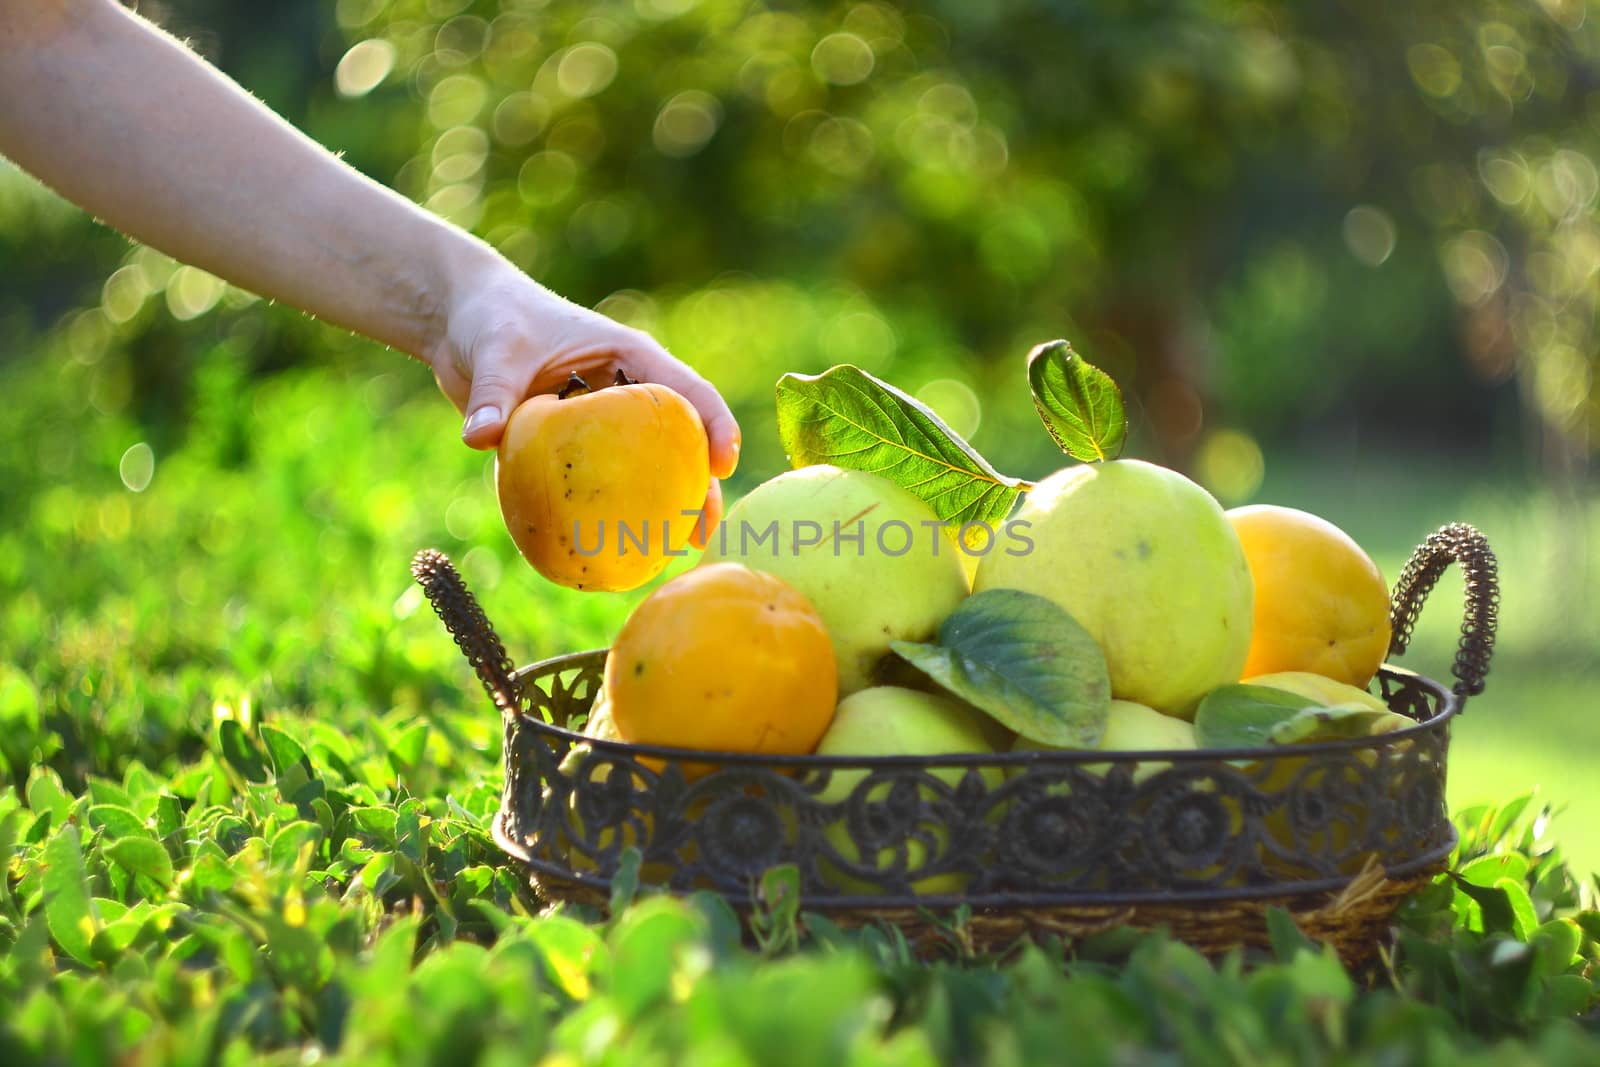 girl hand holding persimmons near basket with green background